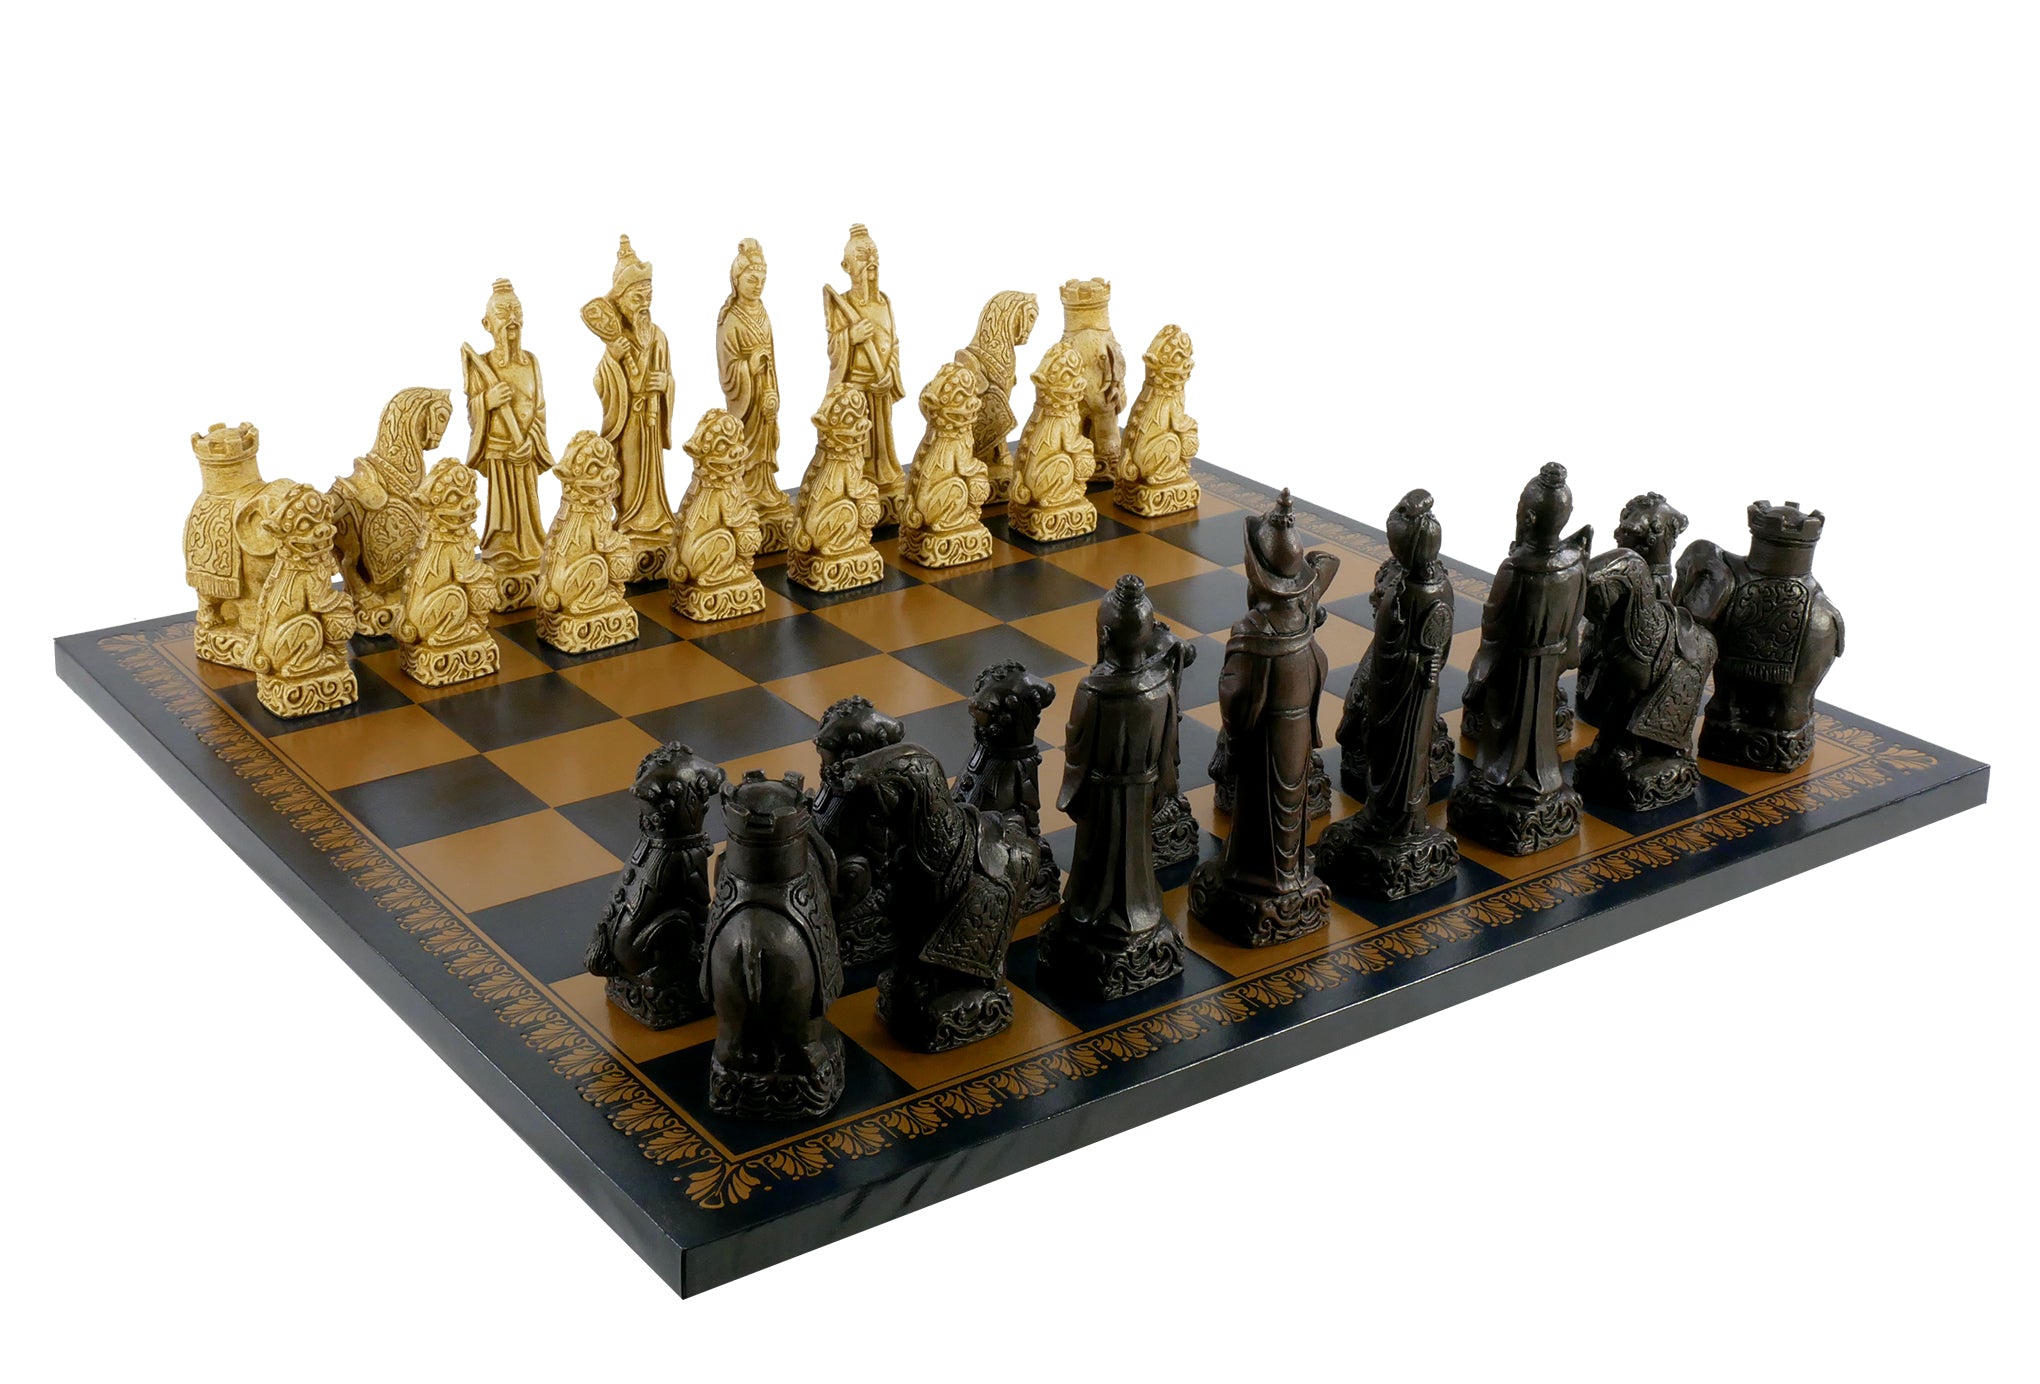 Chess Set - 5" Mandarin Resin Chess Pieces on Gold & Blue Faux Leather Chess board